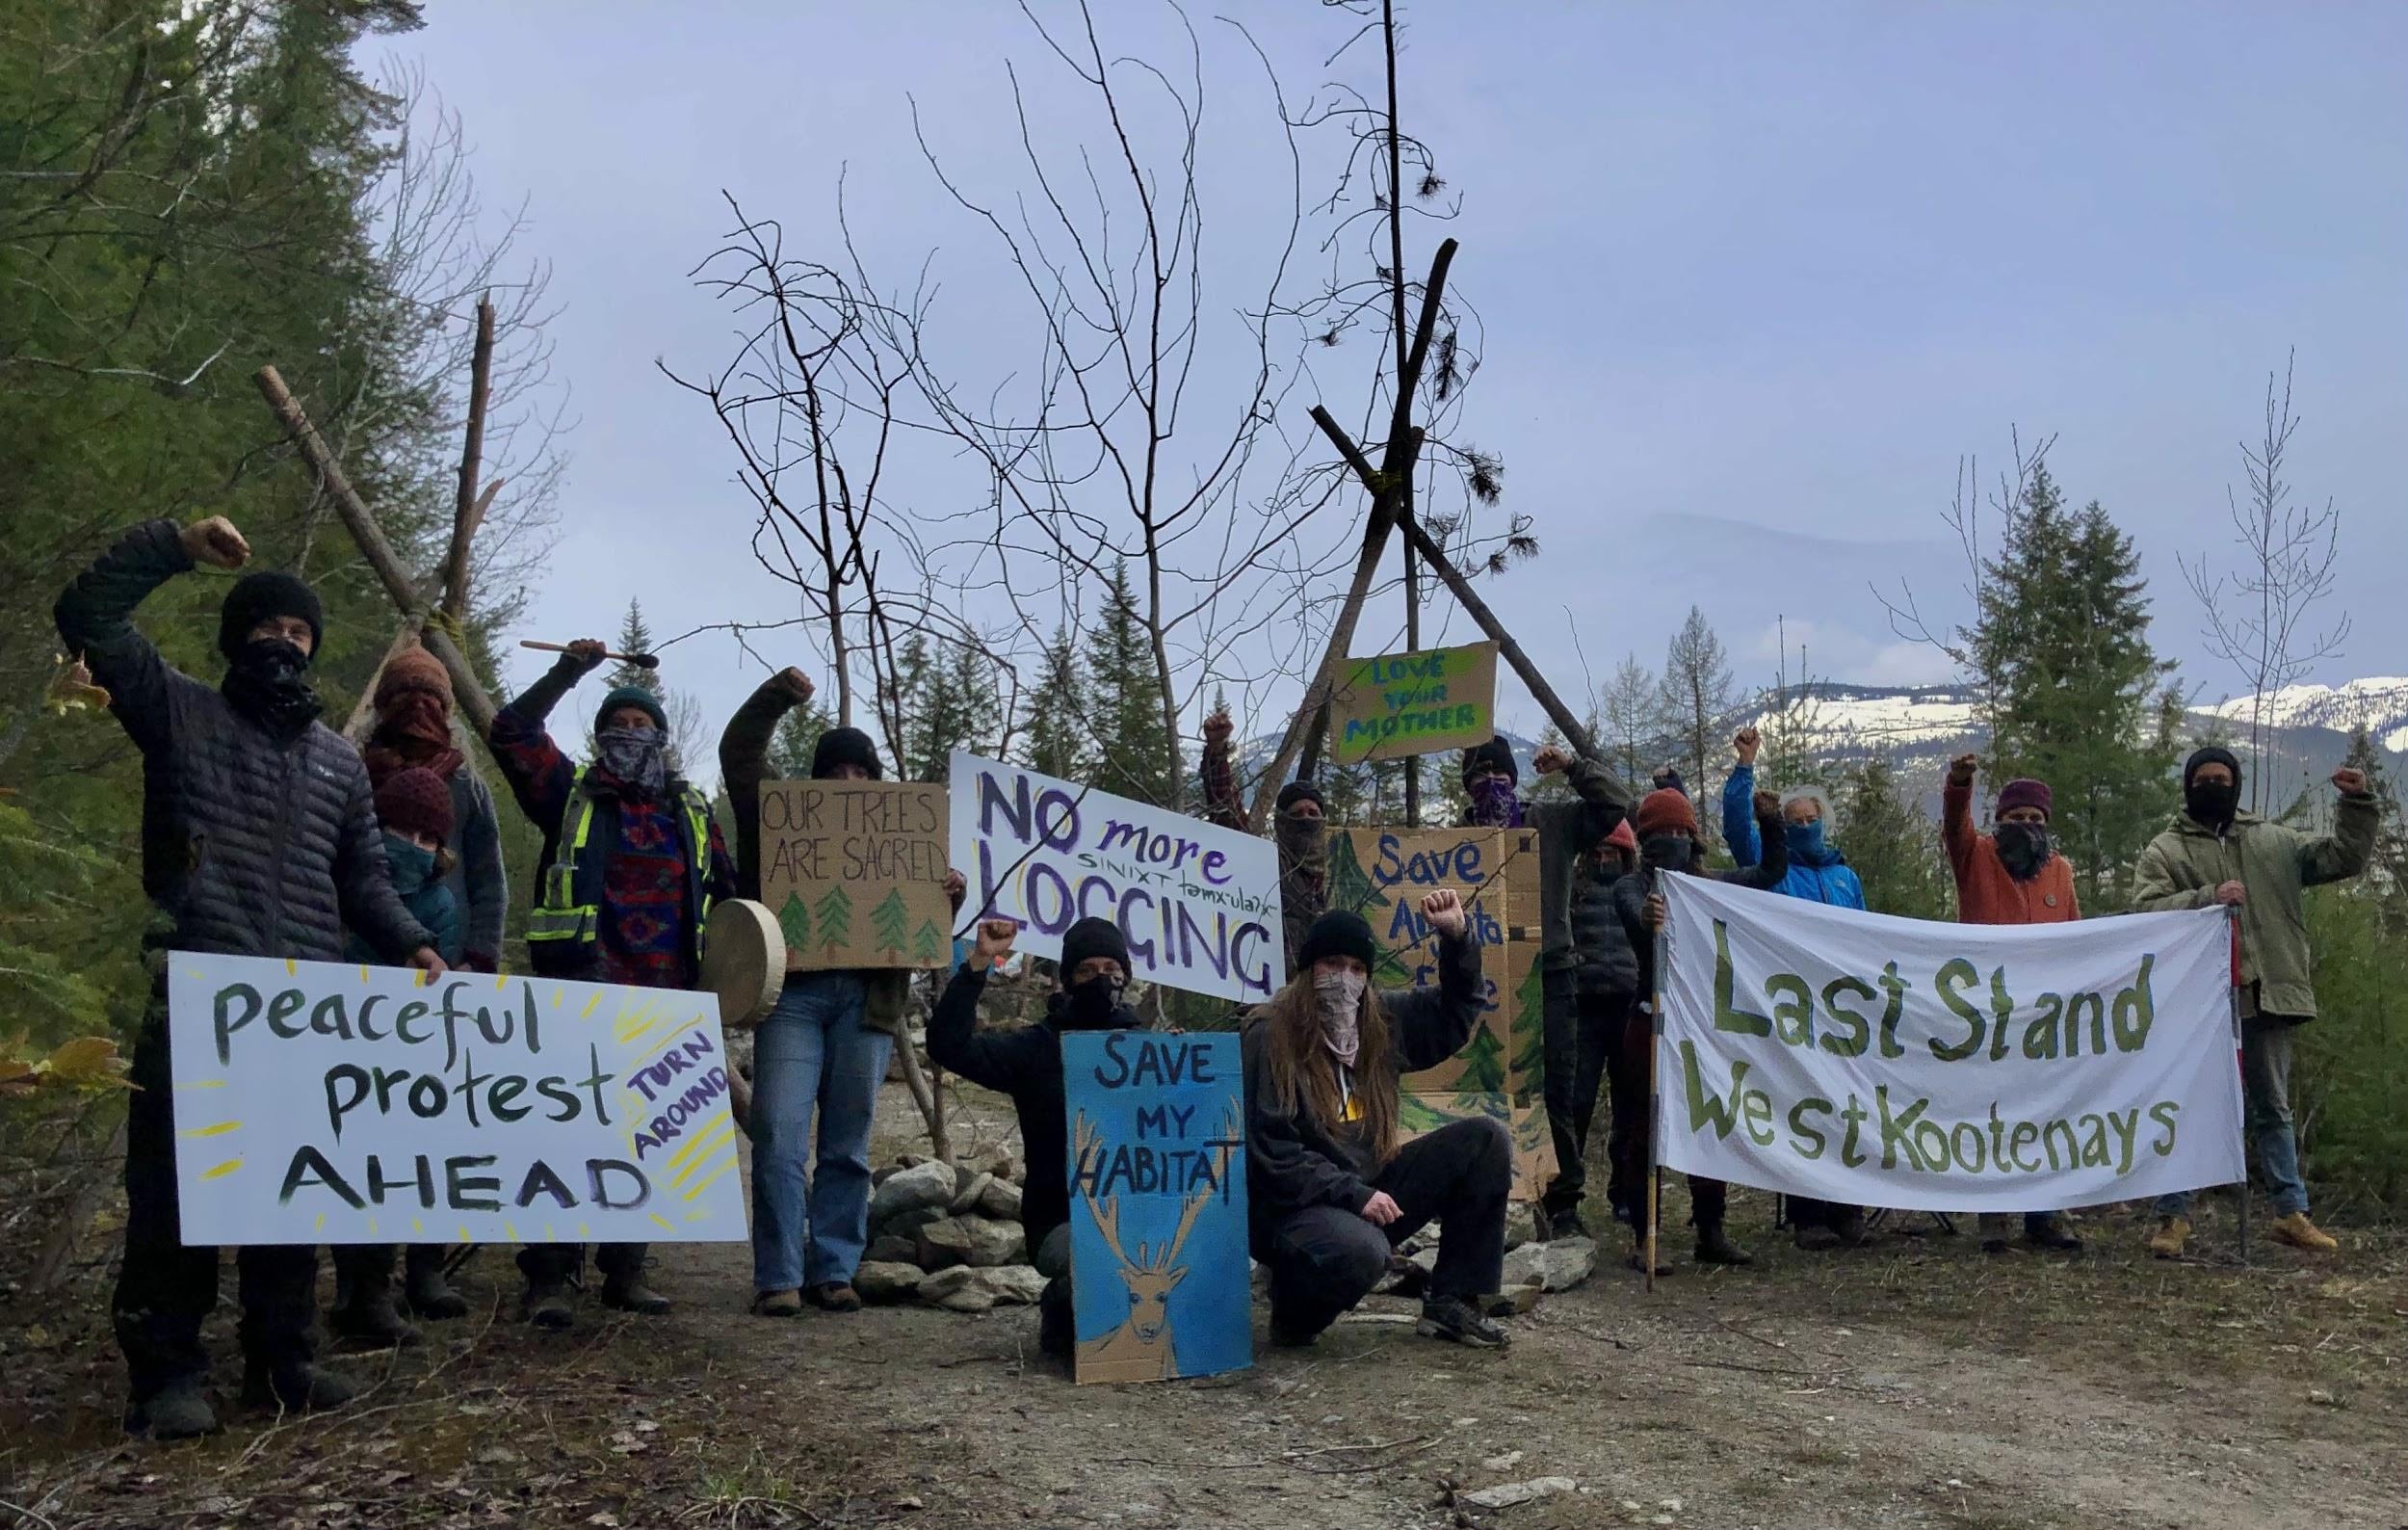 Protestors gather to stop plan to cut old growth forest near Argenta